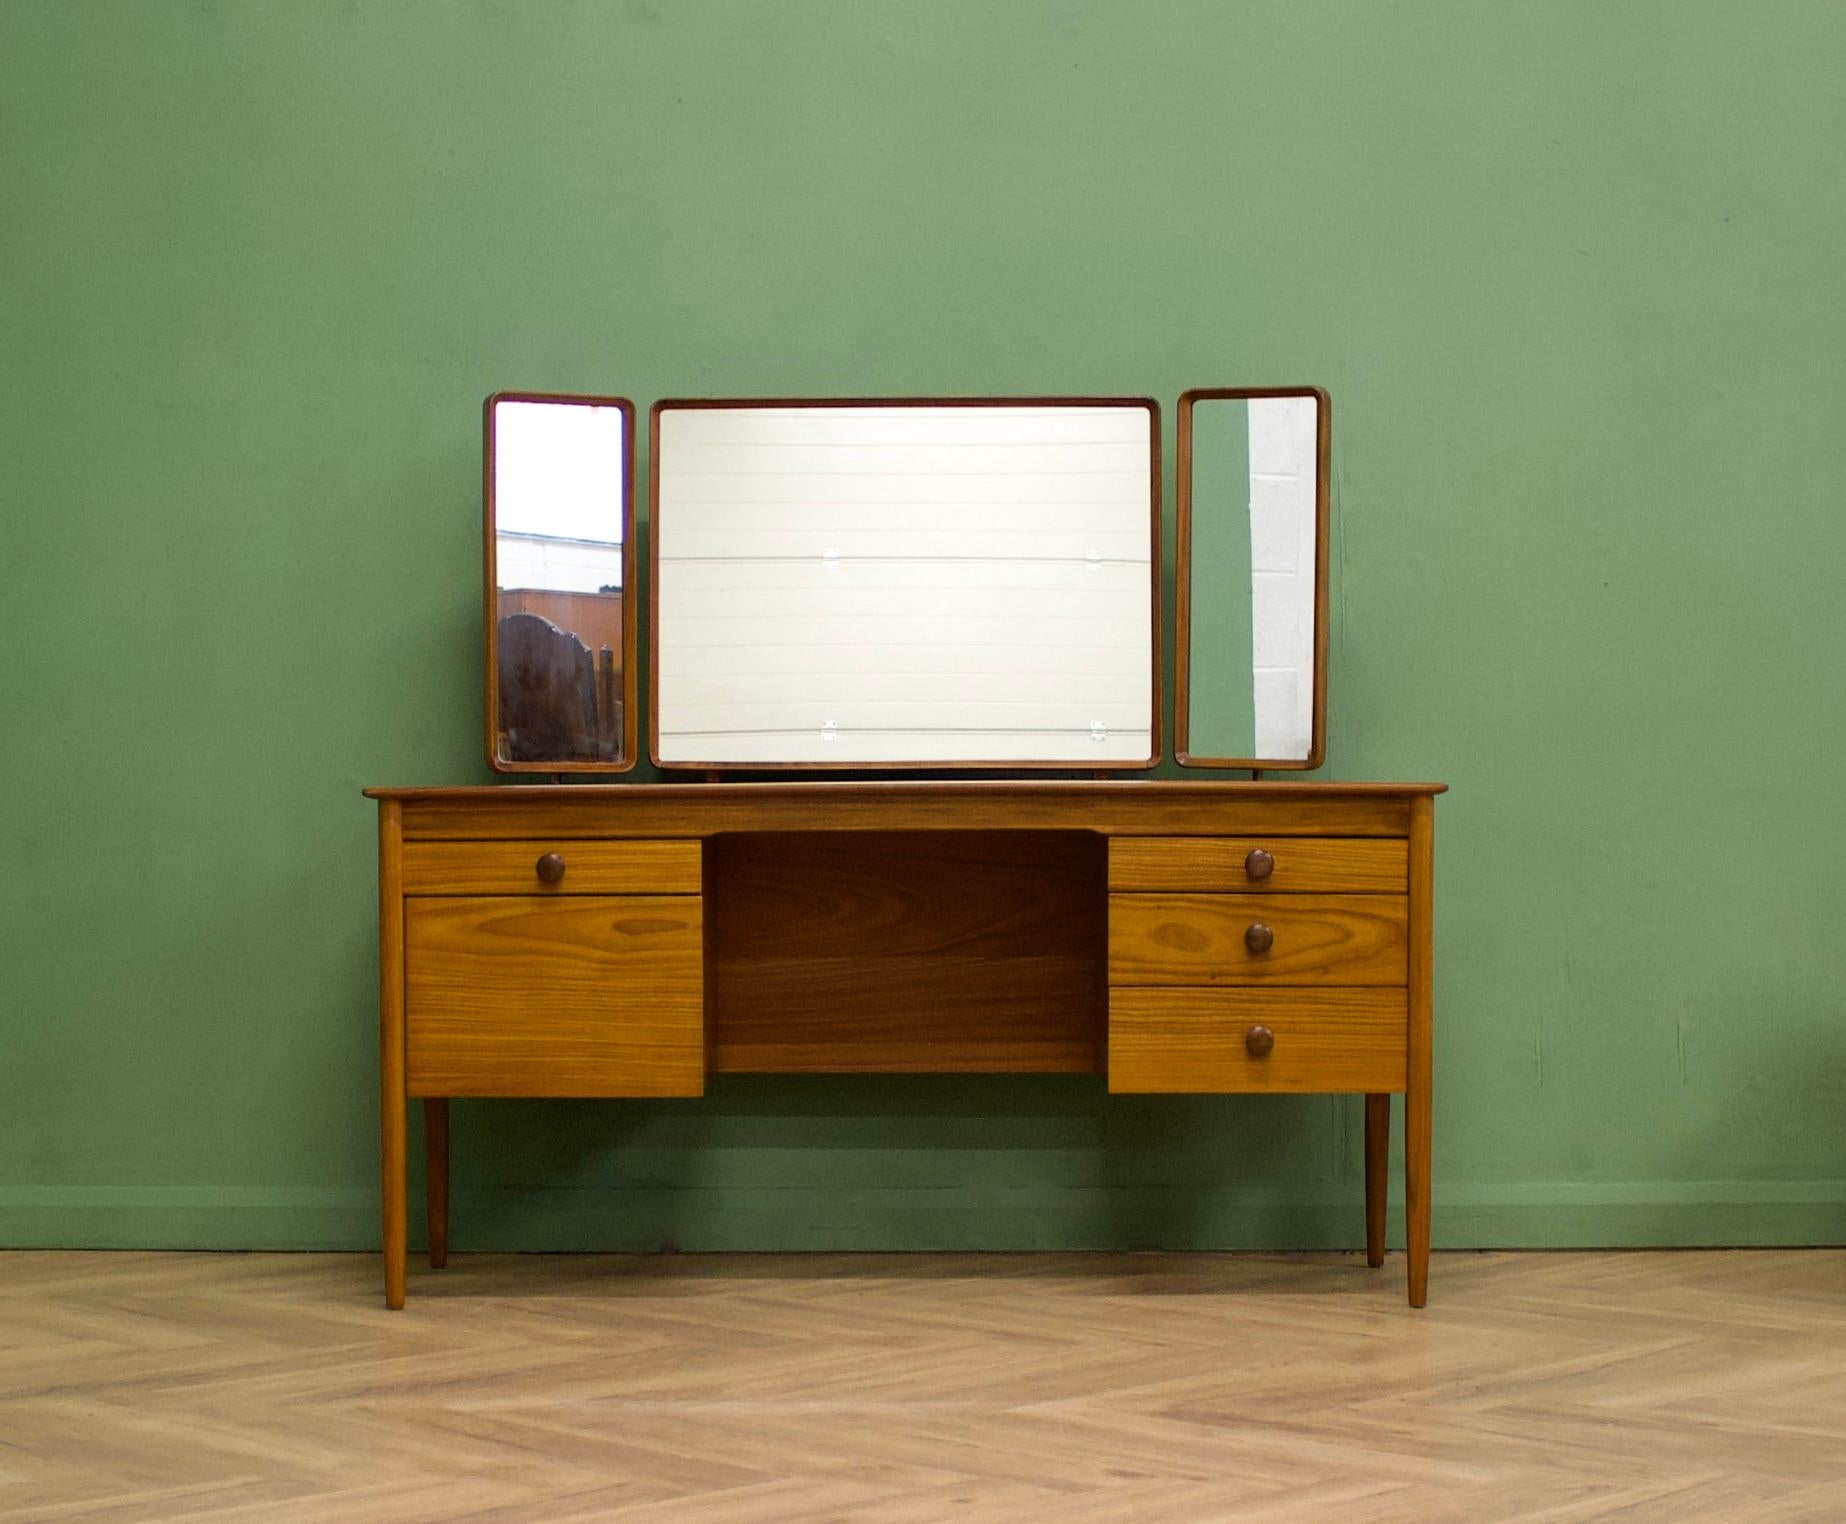 A mid century teak dressing table from Butilux - a little known about high quality furniture makers, circa 1960's
Complete with a triptych mirror - all three are adjustable either by tilting or swiveling
There are three drawers in total and a